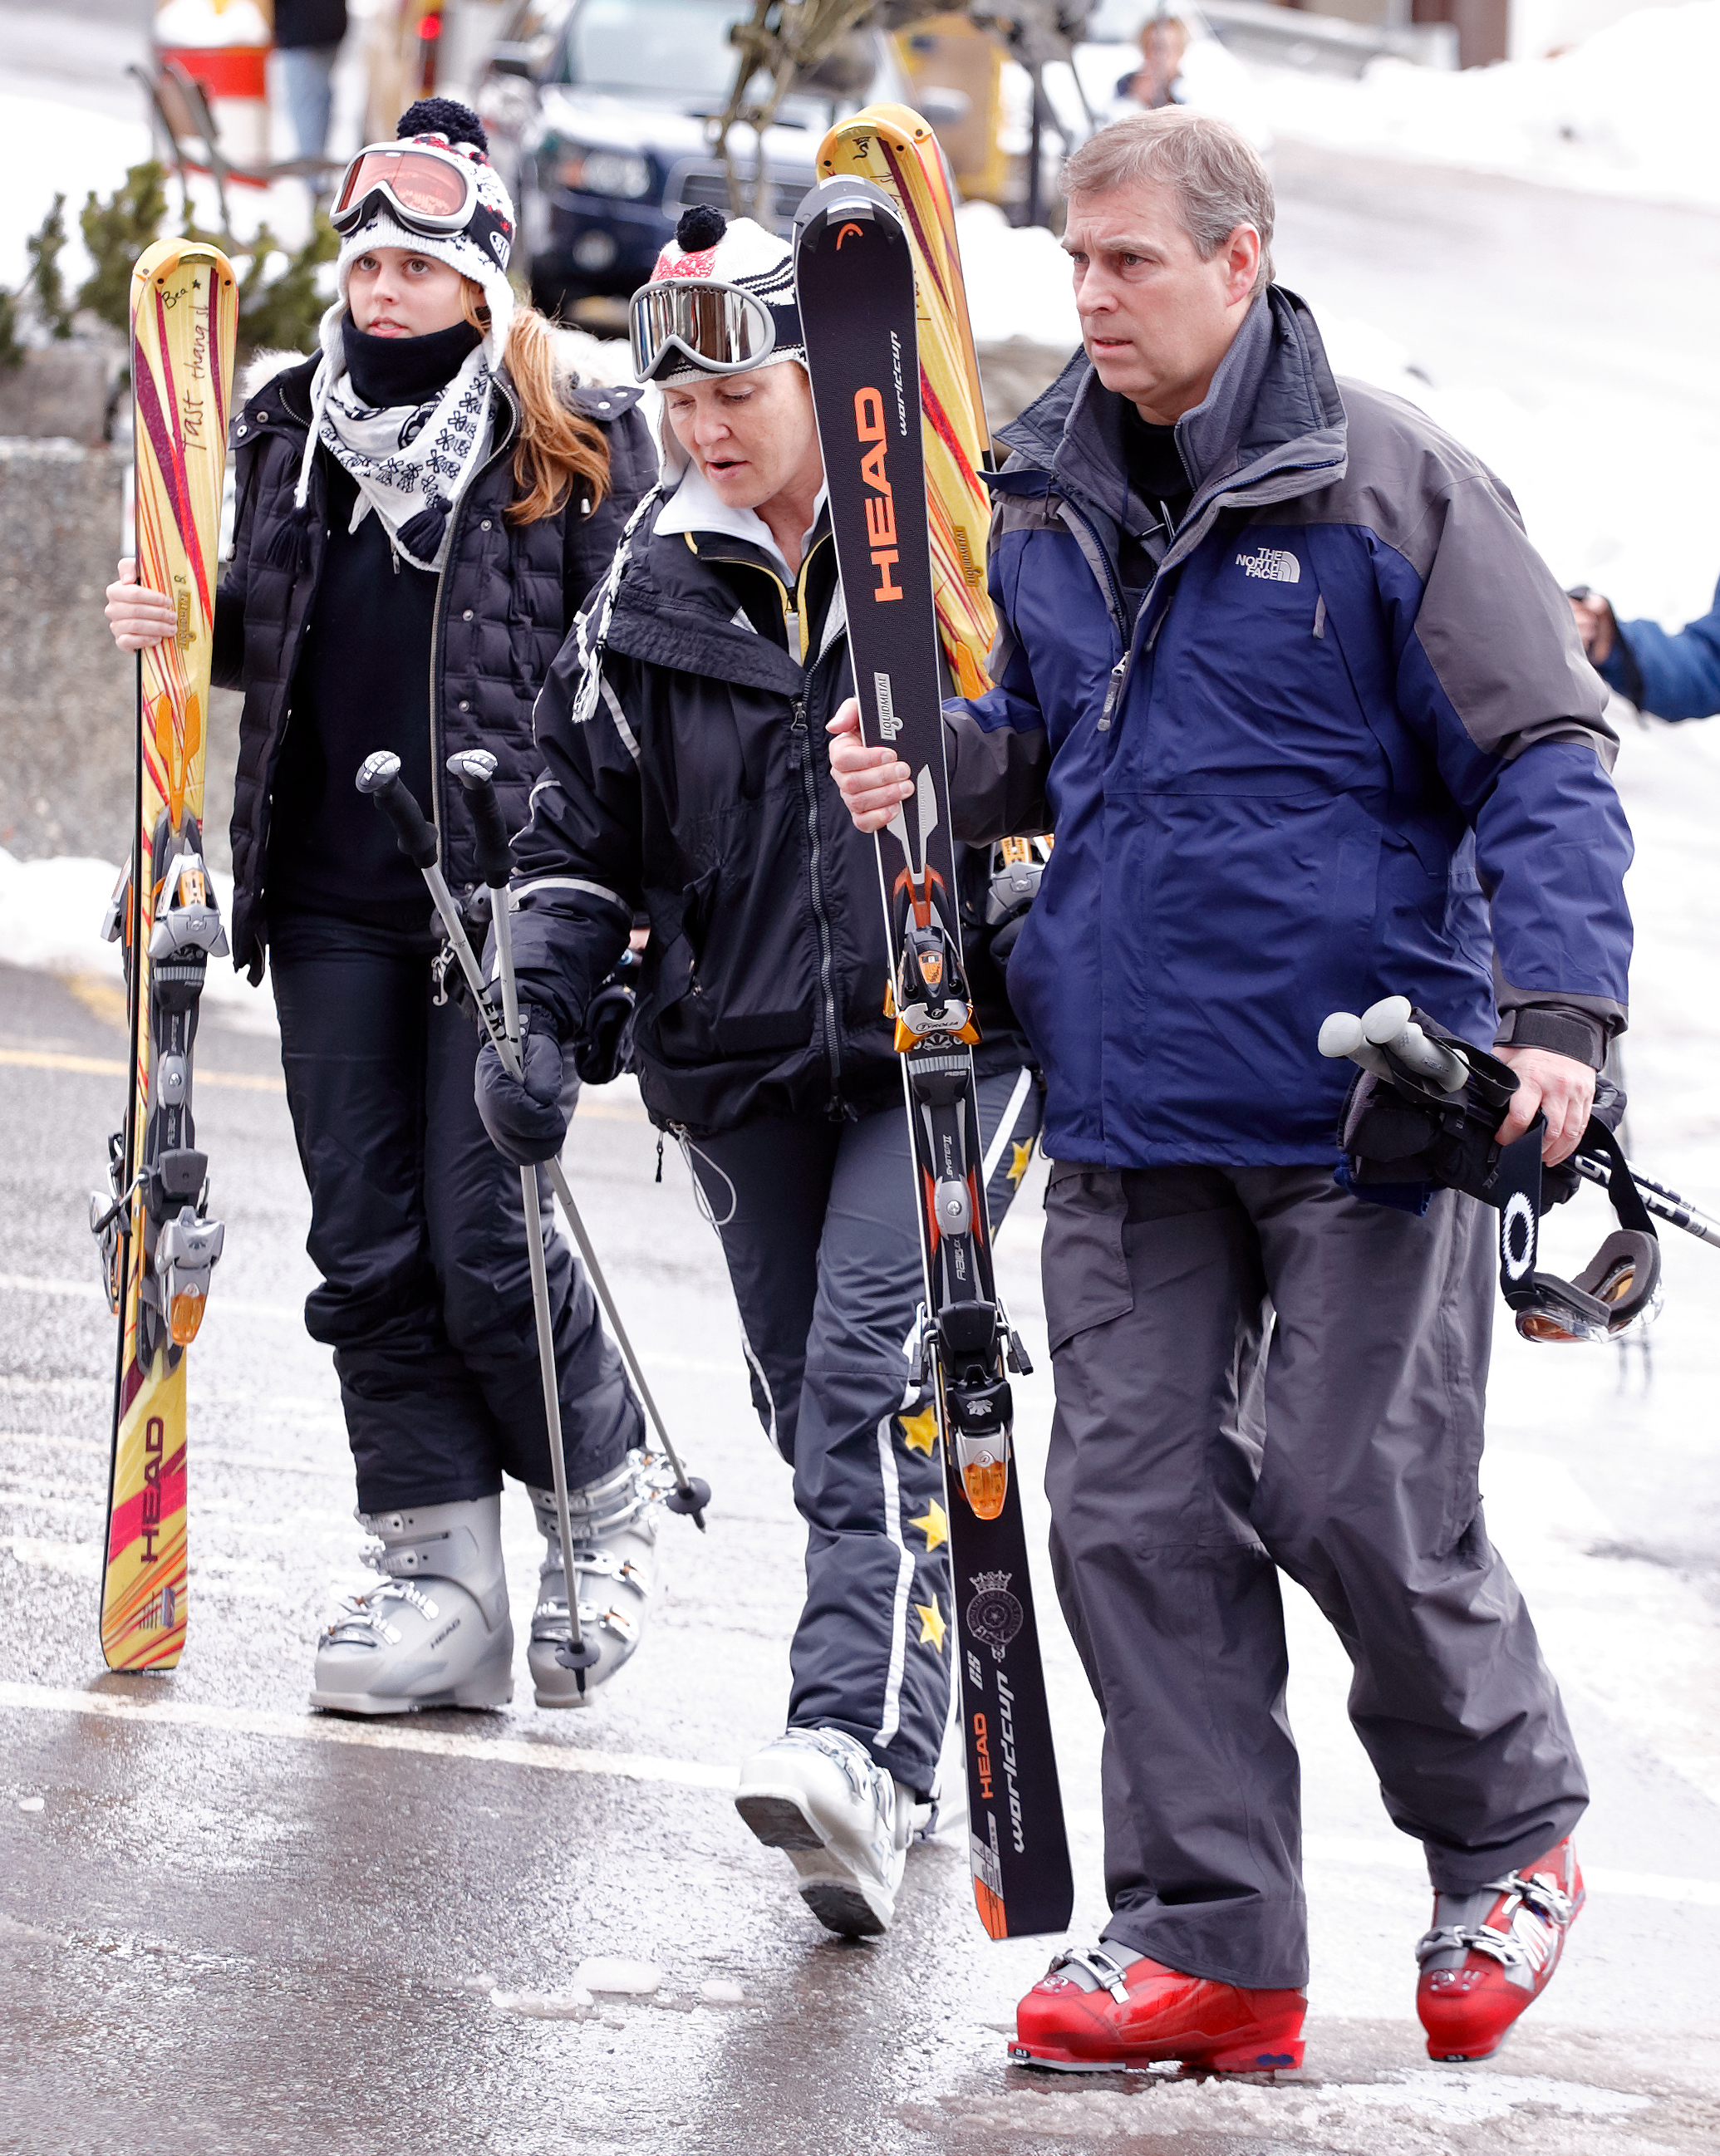 Princess Beatrice, Sarah Ferguson and Prince Andrew spotted on a ski holiday in Verbier, Switzerland on February 14, 2007 | Source: Getty Images